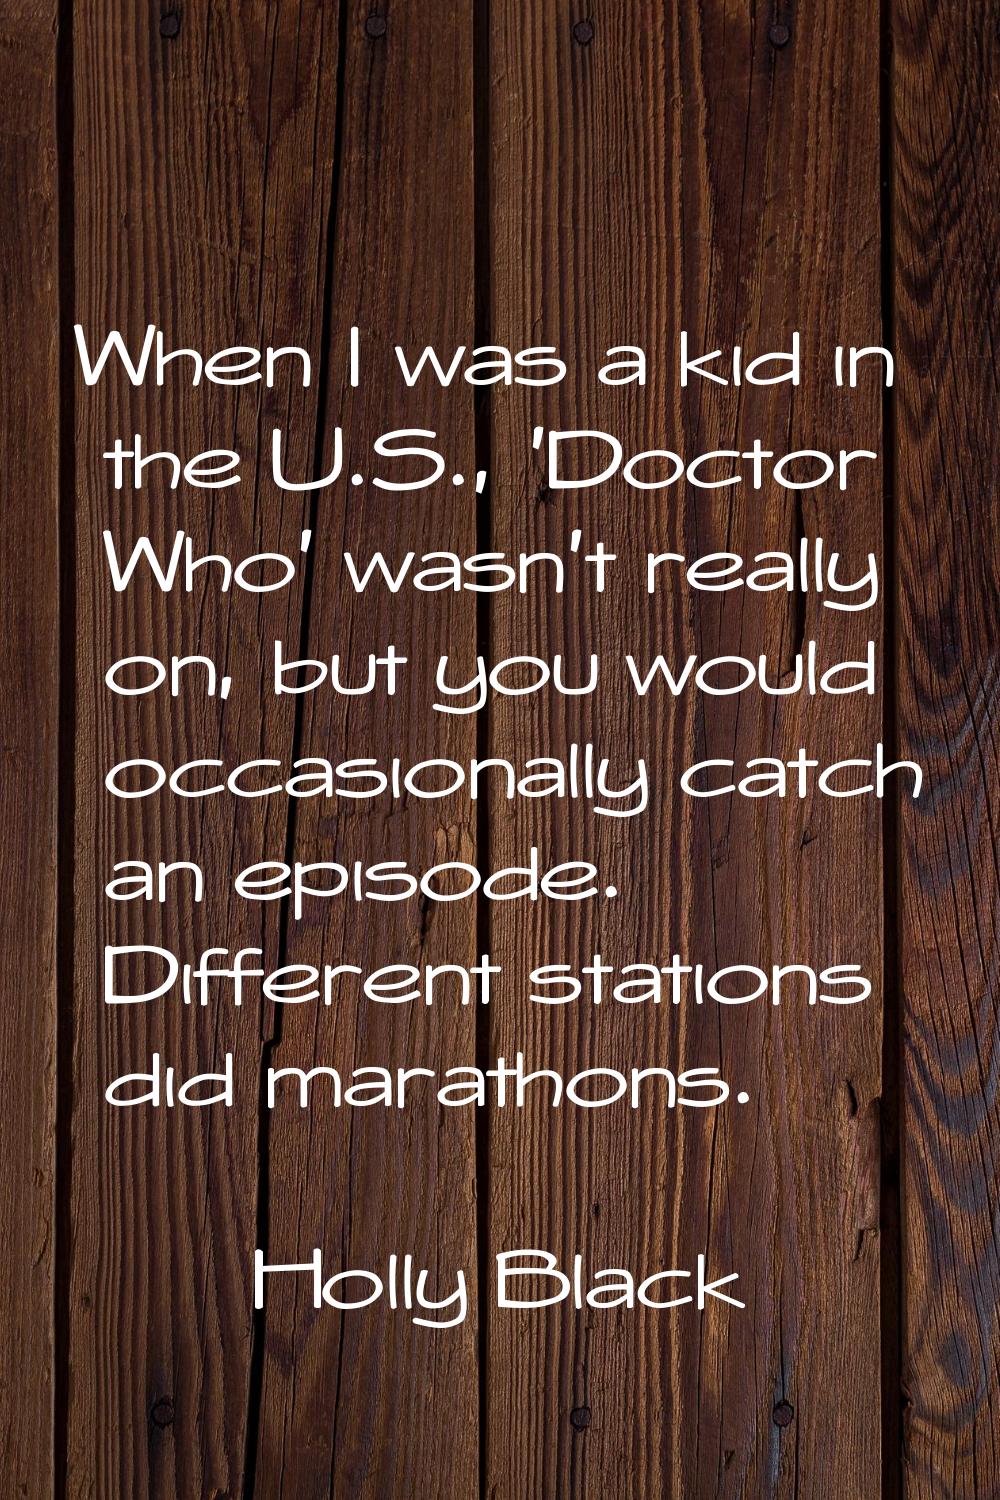 When I was a kid in the U.S., 'Doctor Who' wasn't really on, but you would occasionally catch an ep